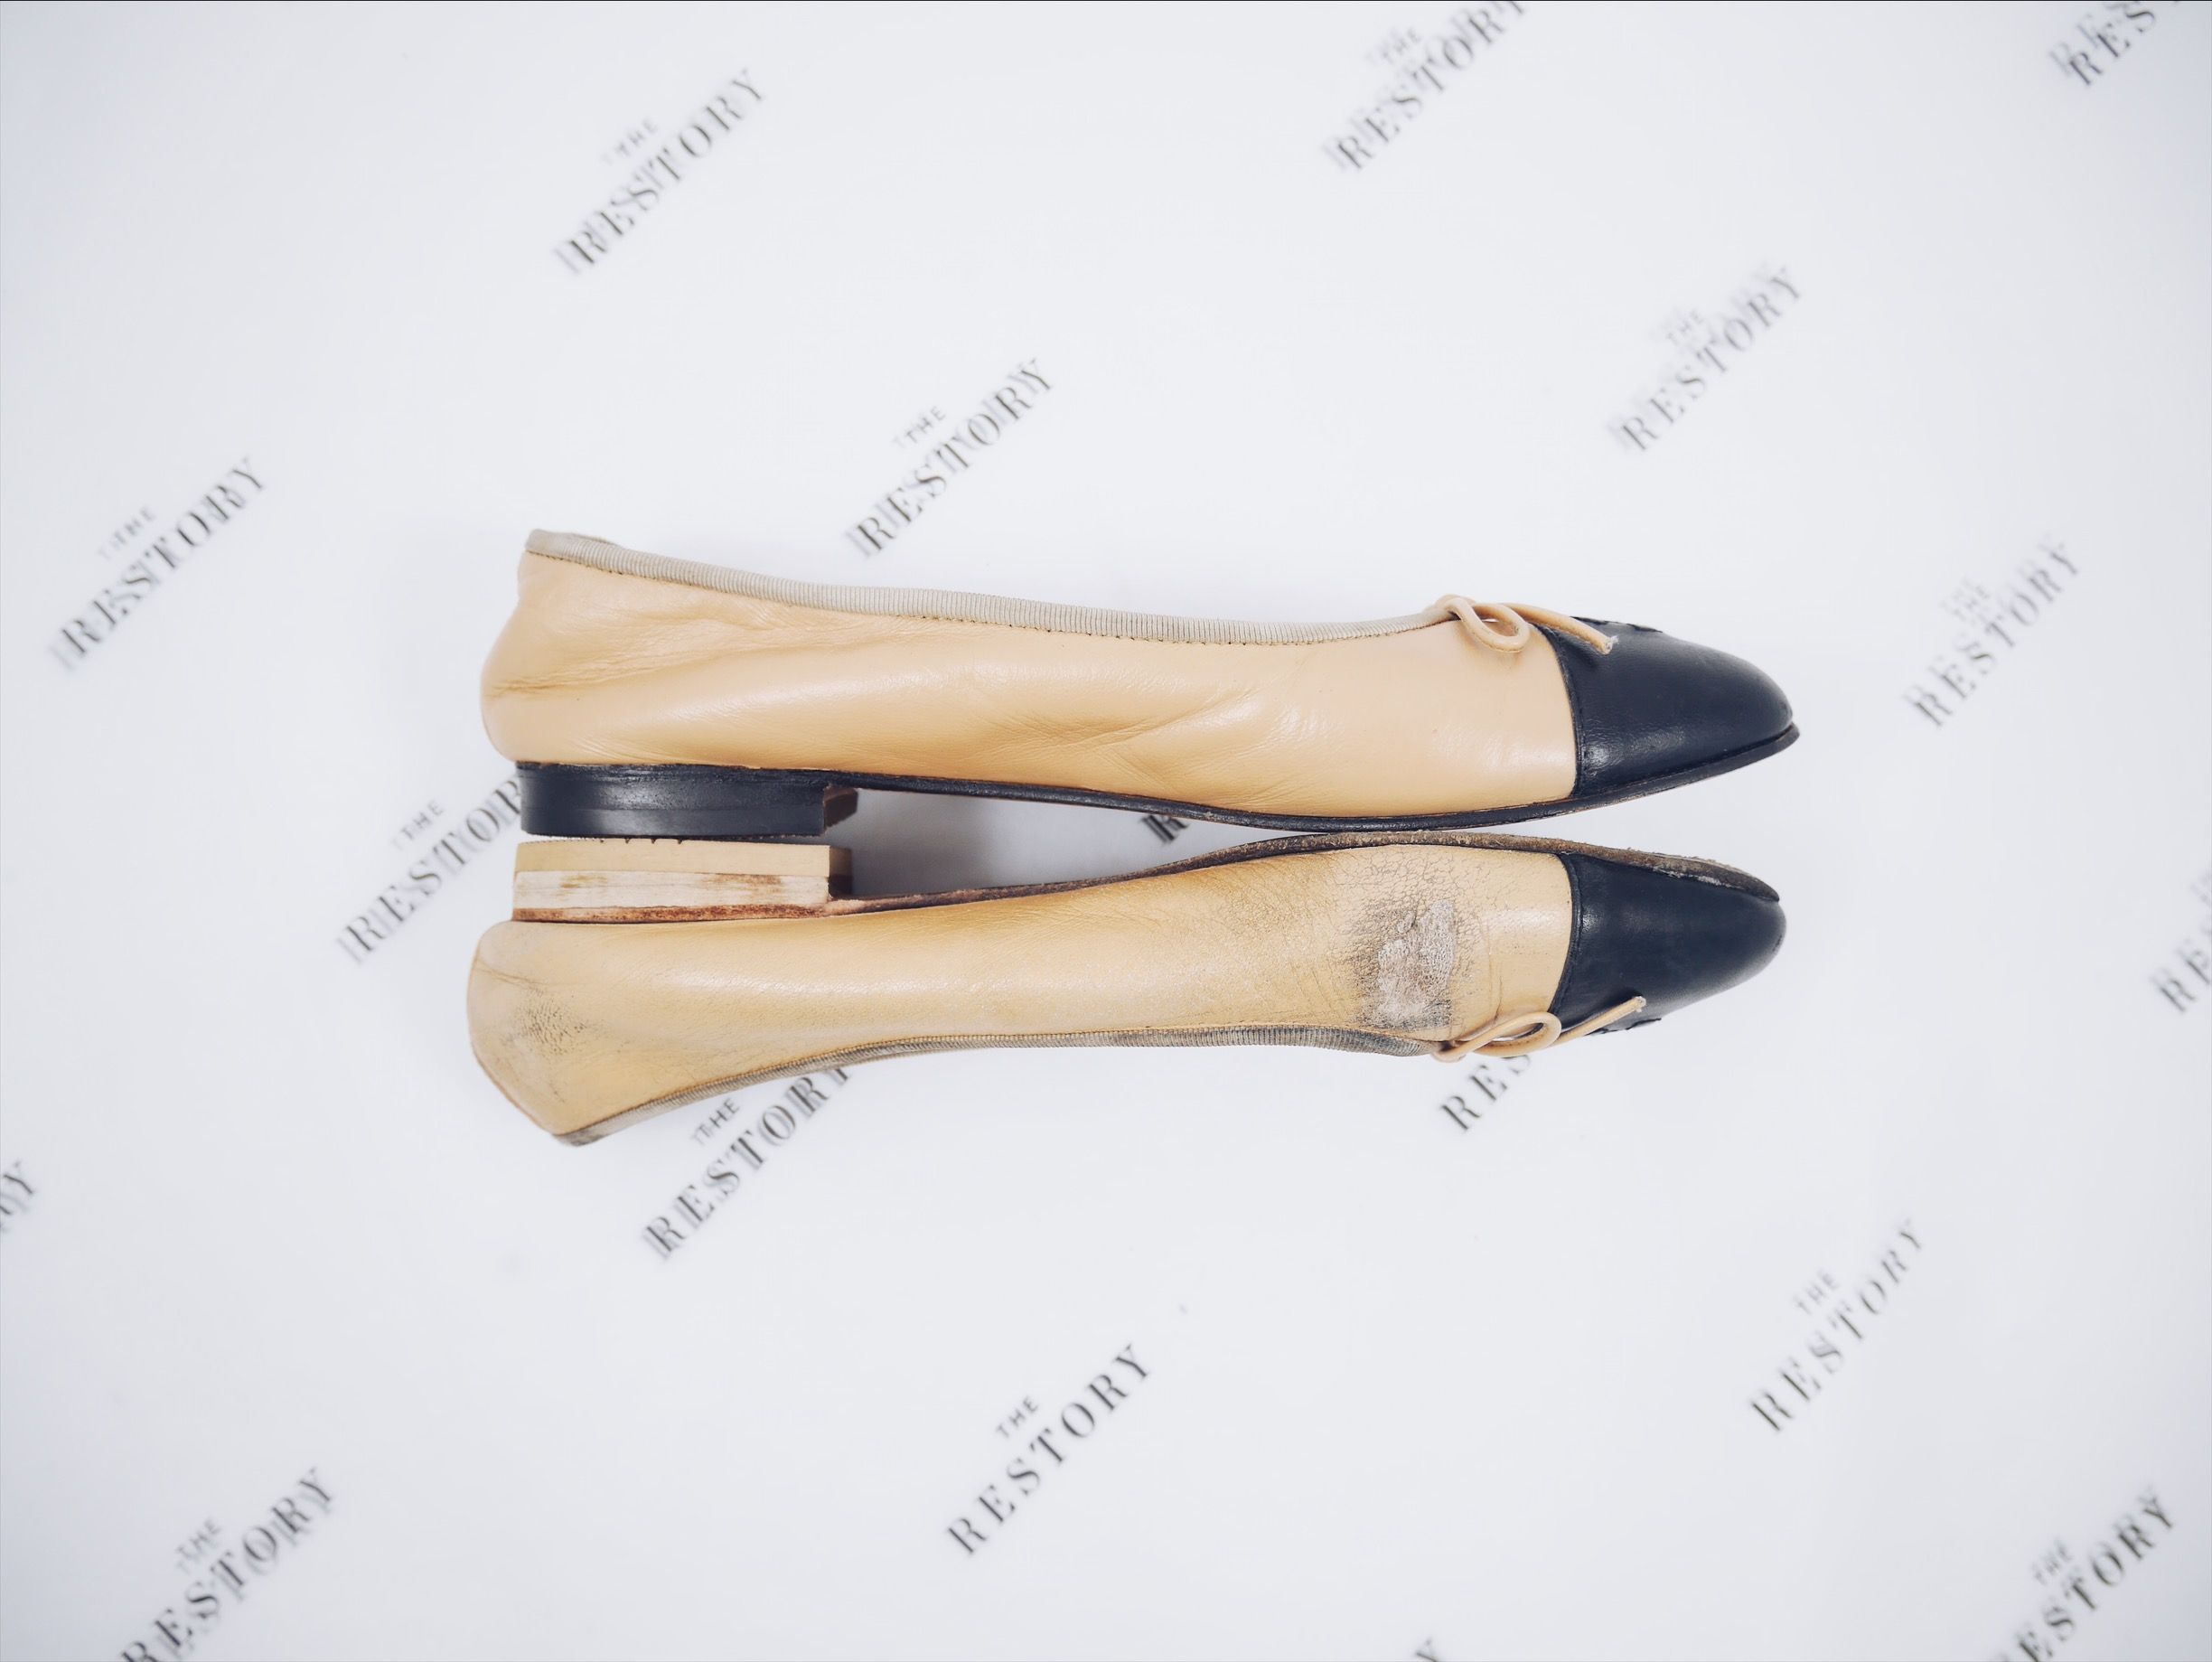 stimulere Udtale Svaghed Luxury Shoe Repair - Chanel Ballet Flats - The Restory